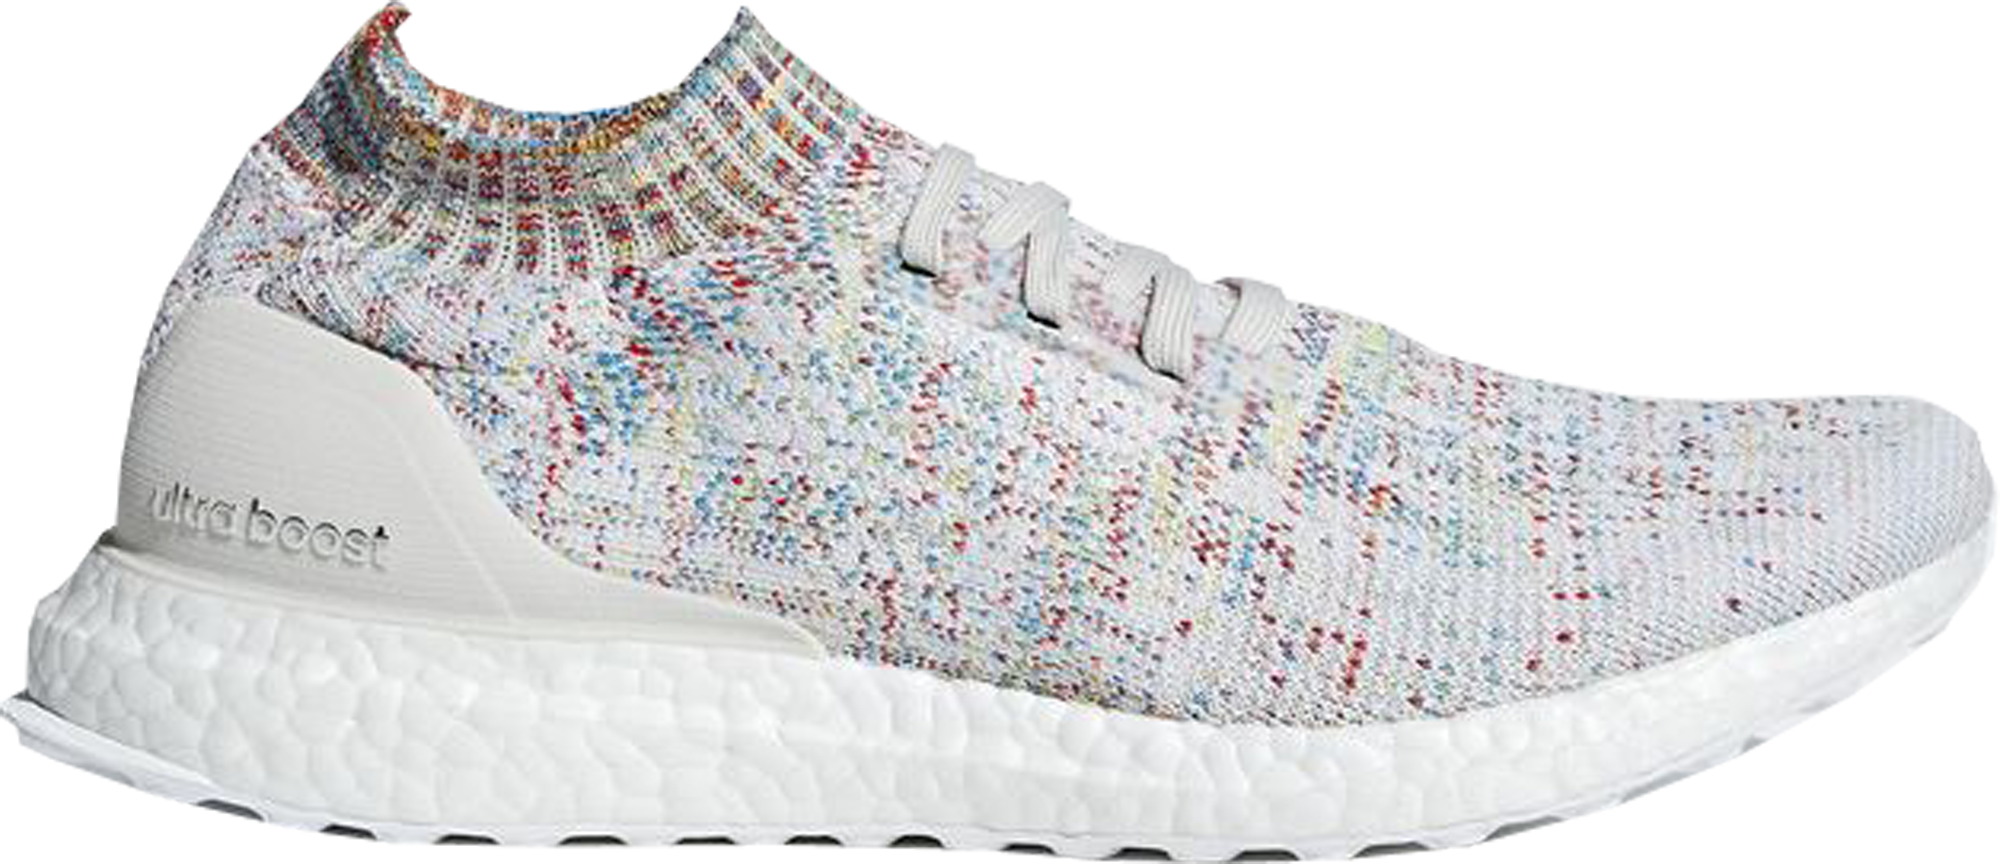 adidas Ultra Boost Uncaged White Multi 